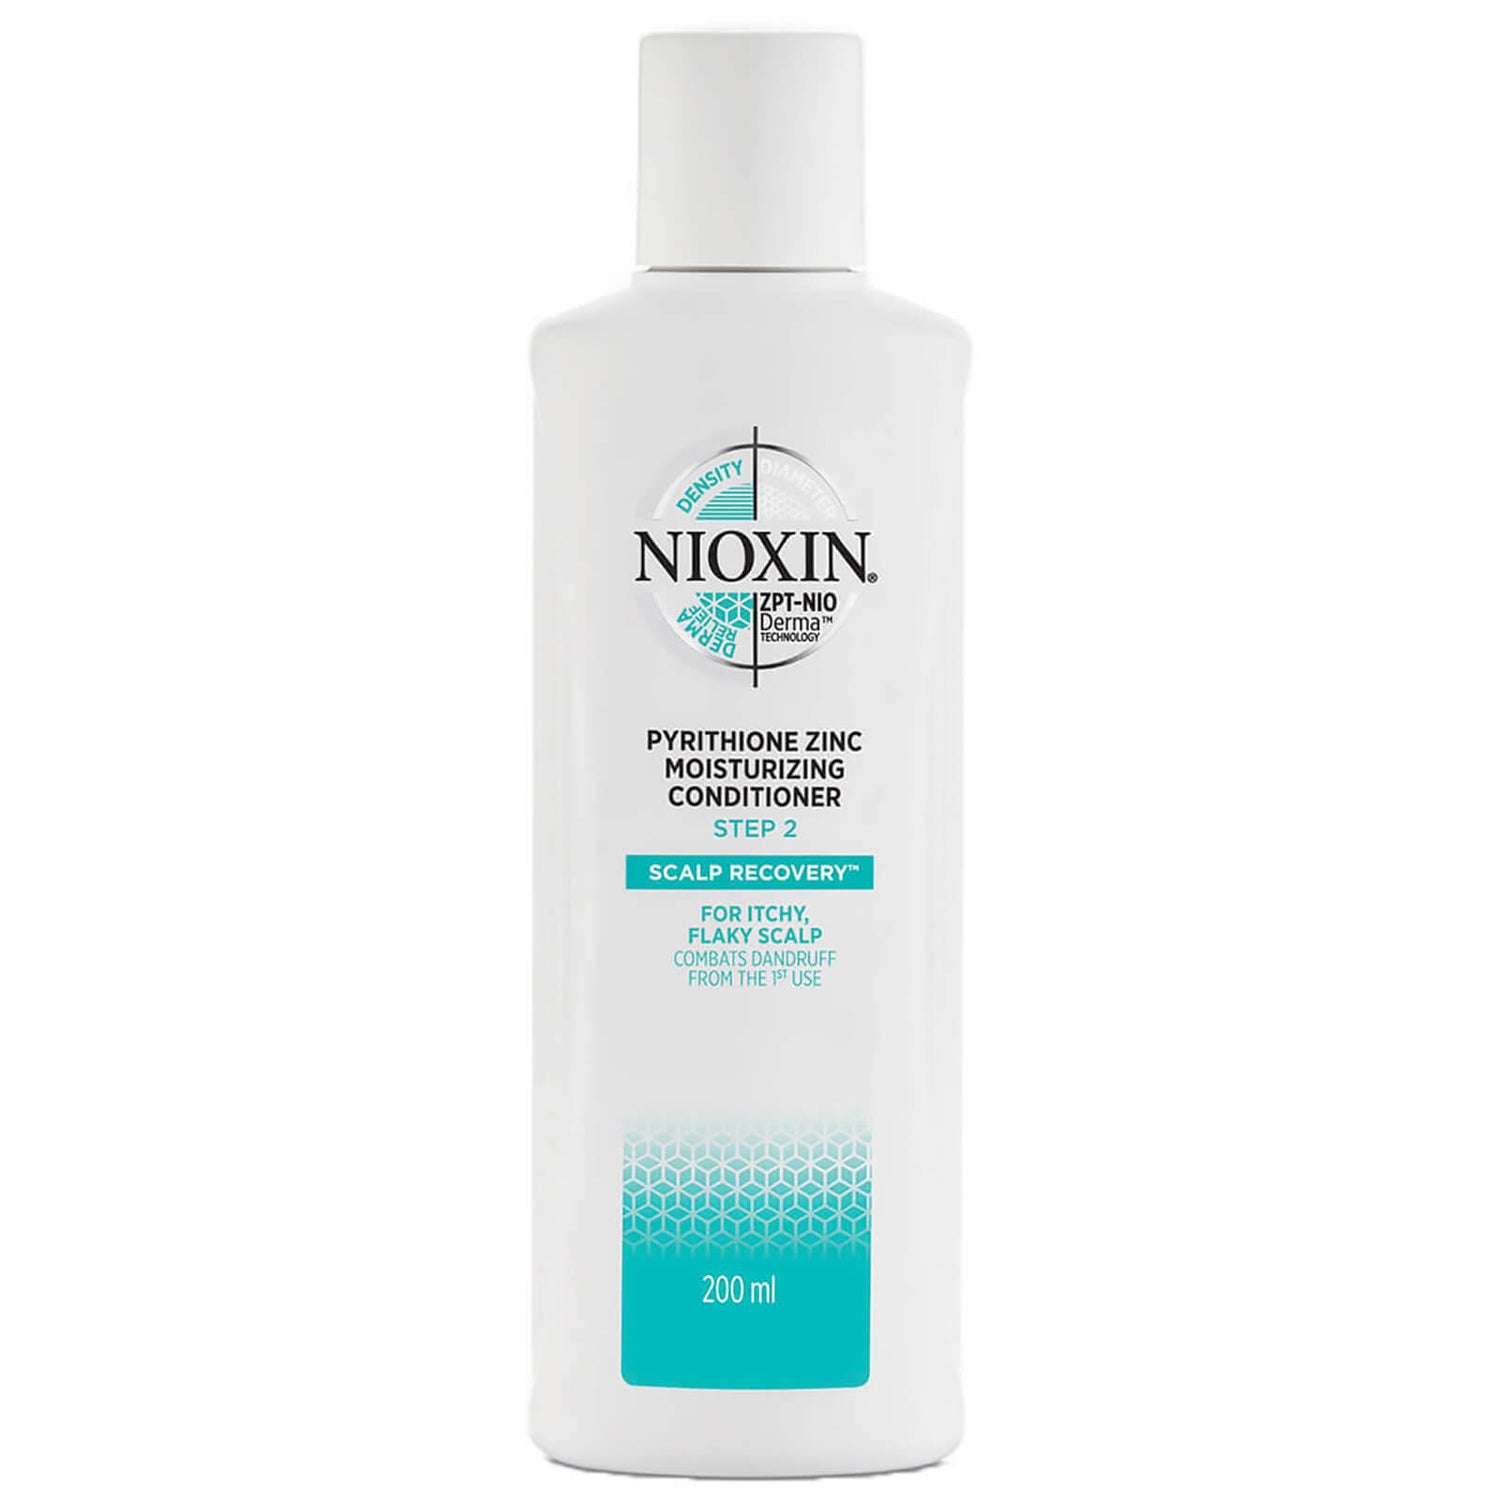 NIOXIN Scalp Recovery Anti-Dandruff Moisturising Conditioner for Itchy, Flaky Scalp 200 ml